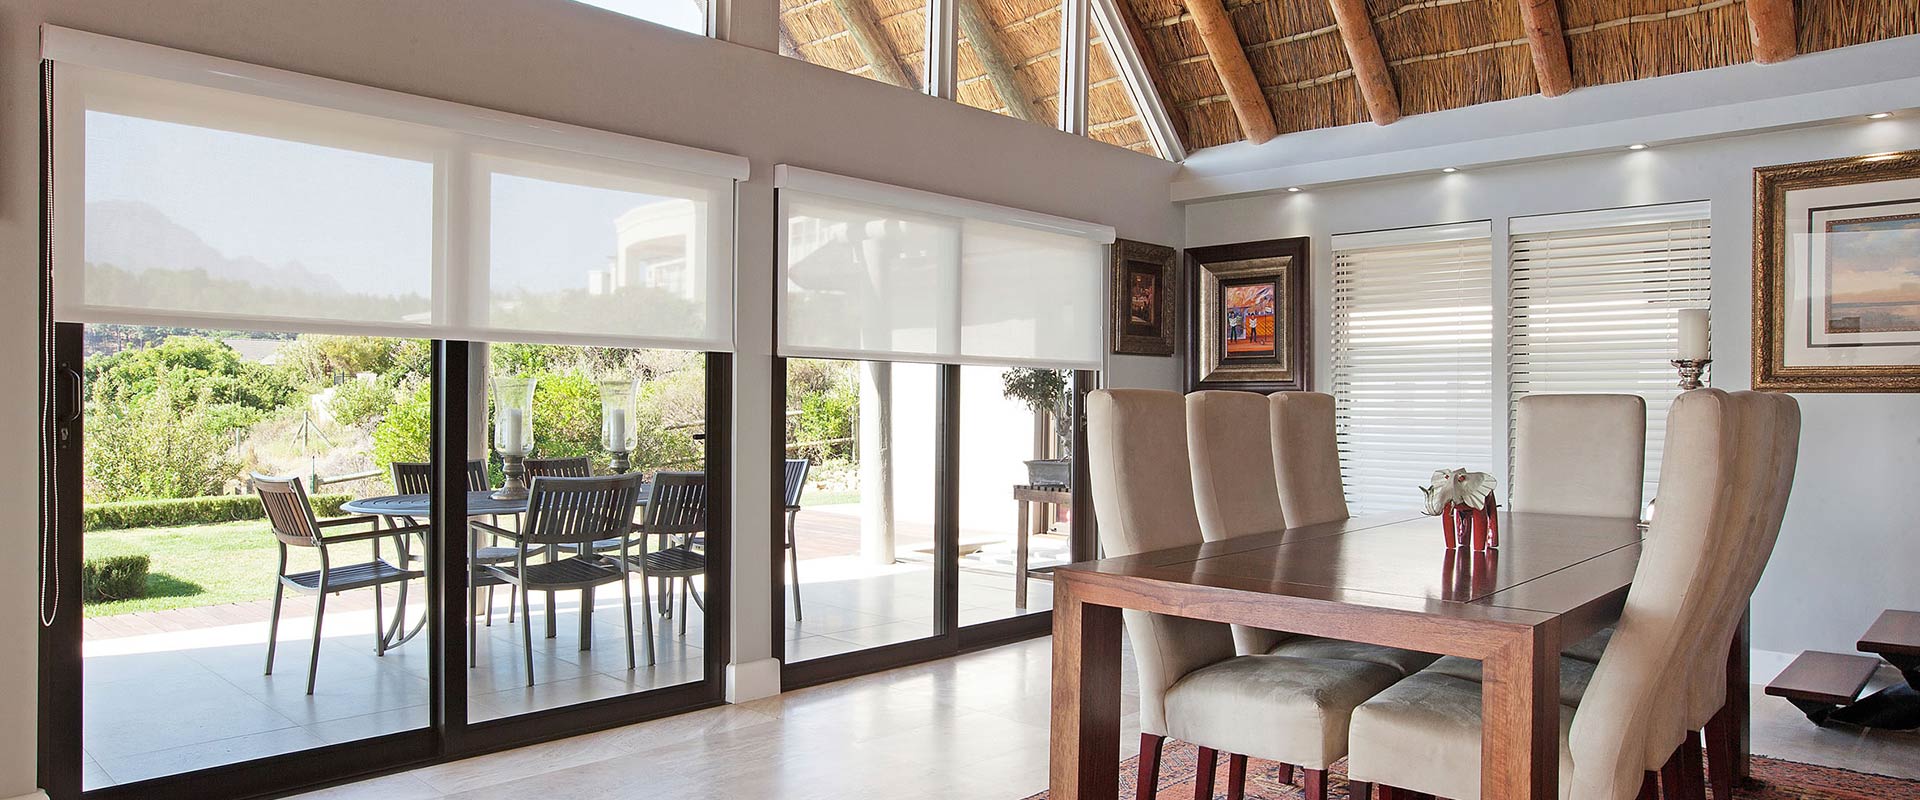 Screen Roller Blinds For Your Home | Sol Shutters & Blinds